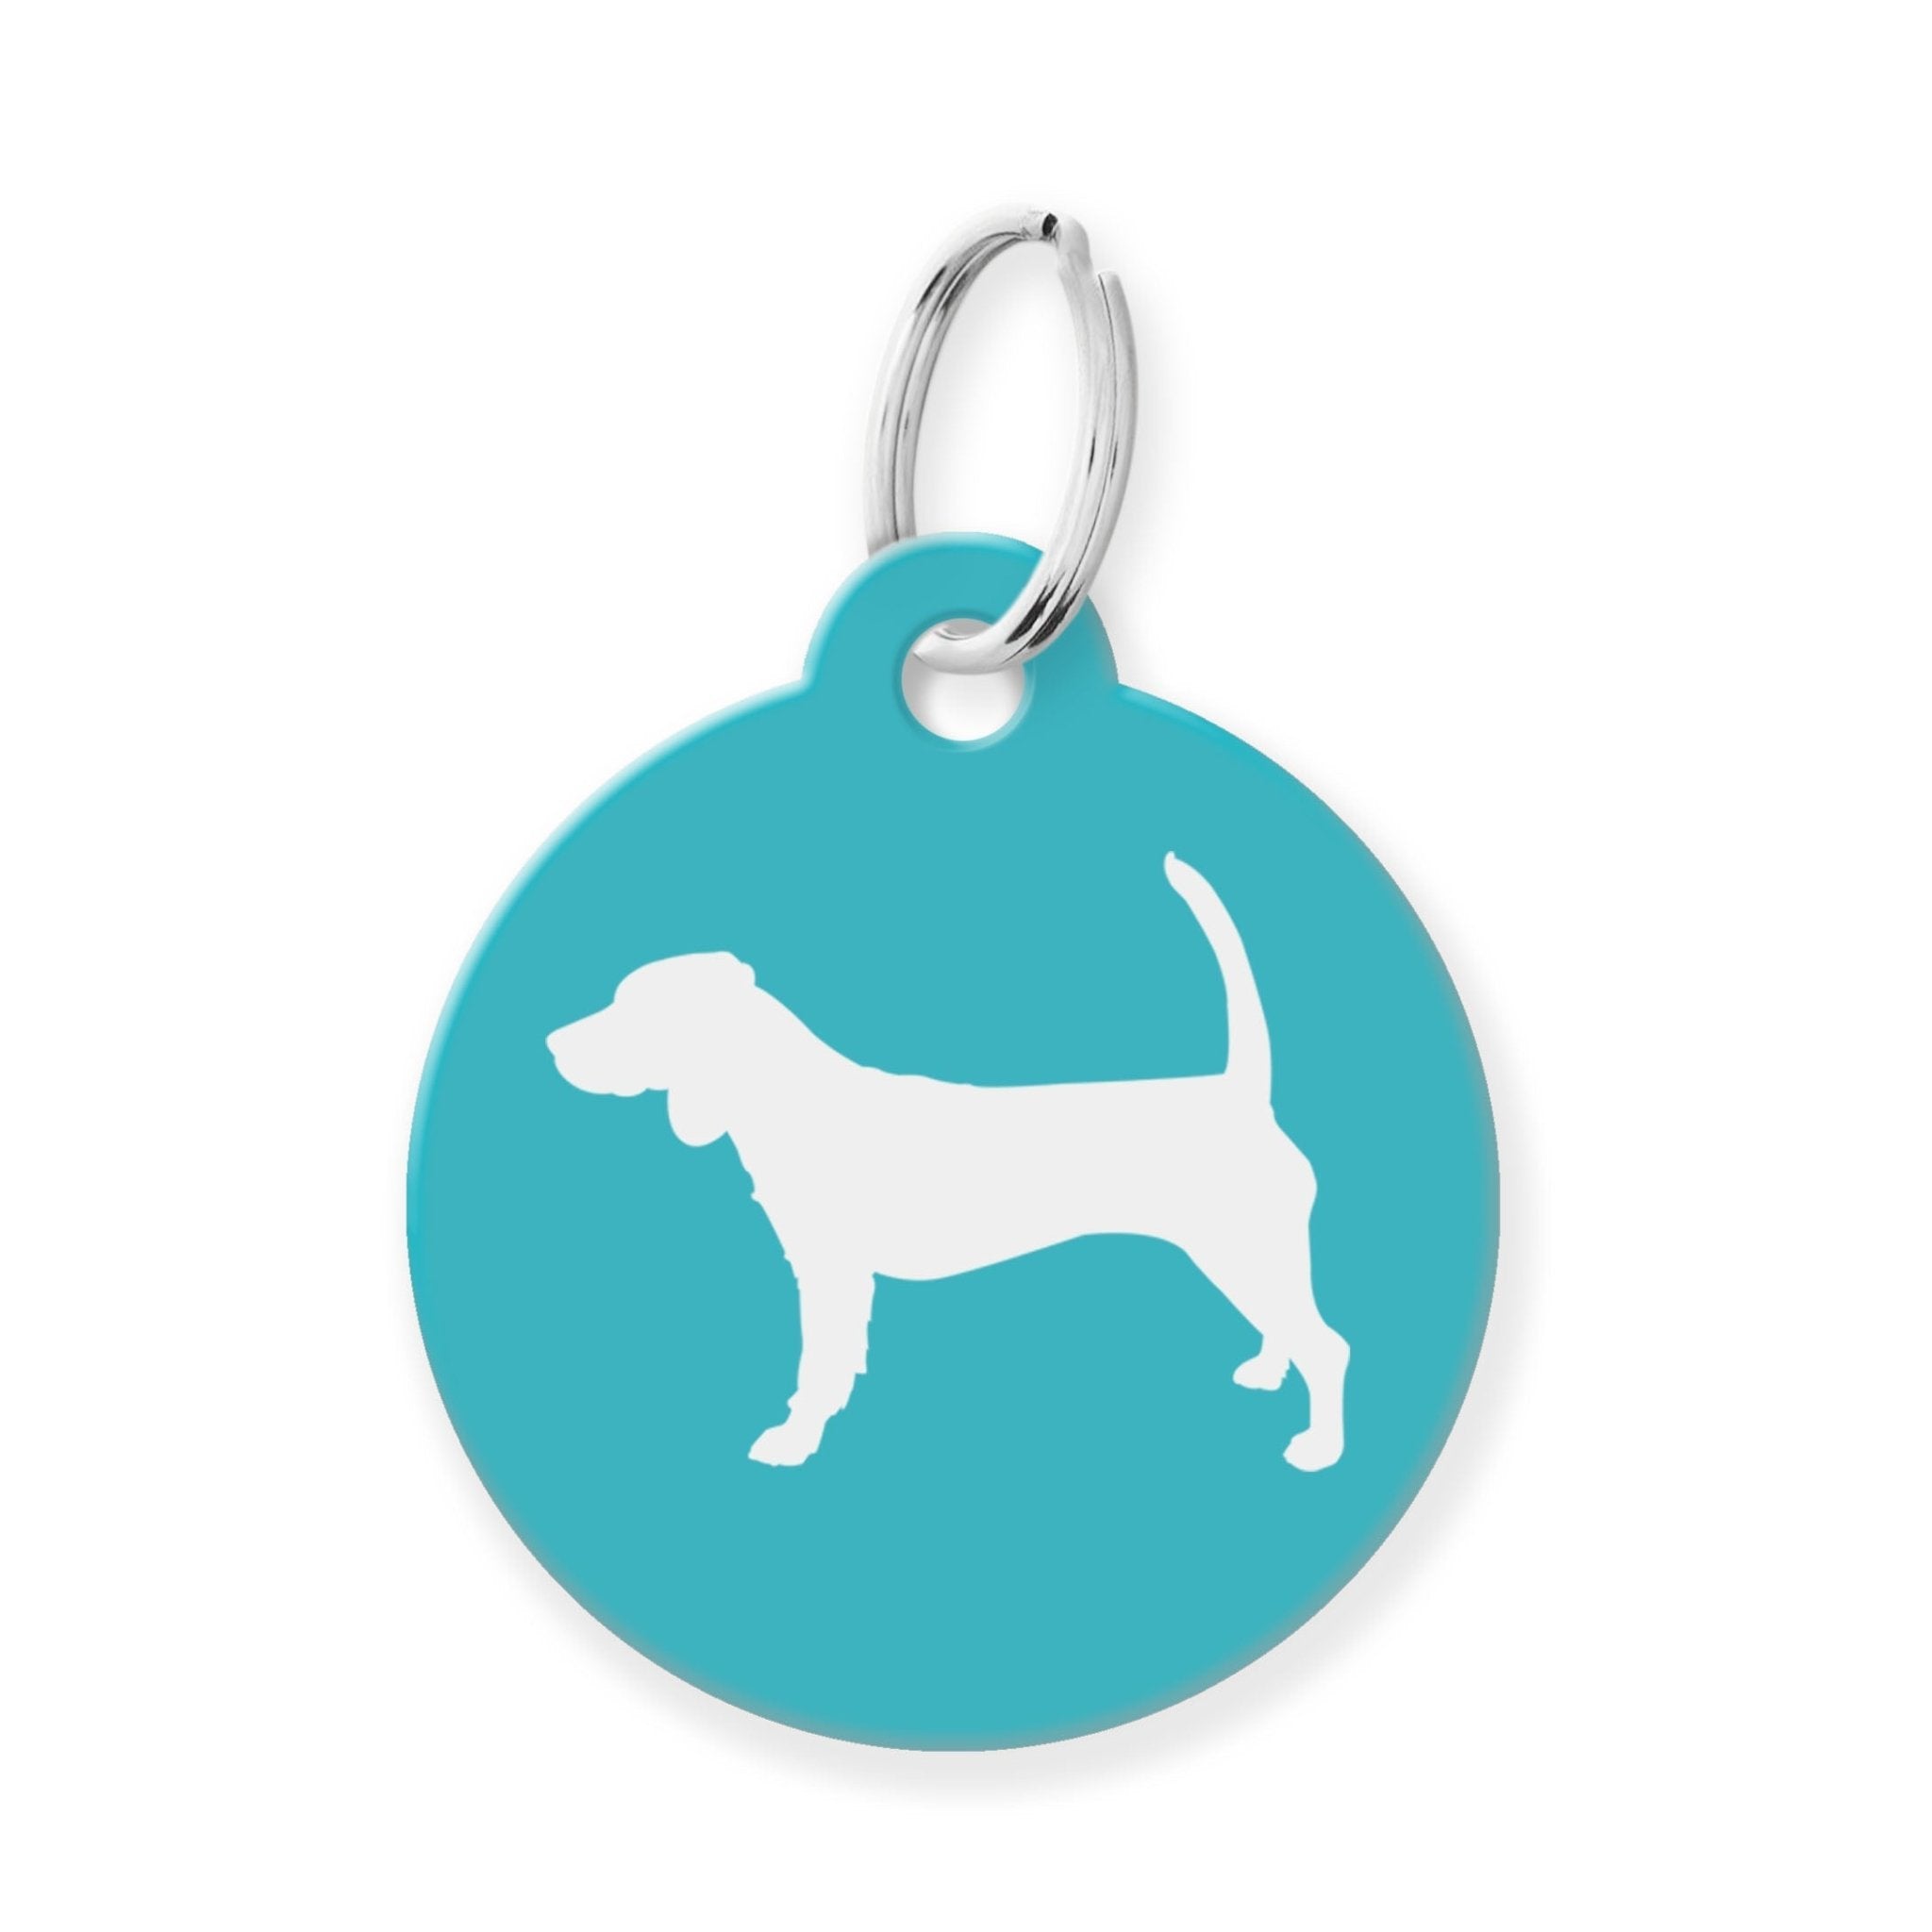 Beagle Silhouette Pet Tag - The Barking Mutt